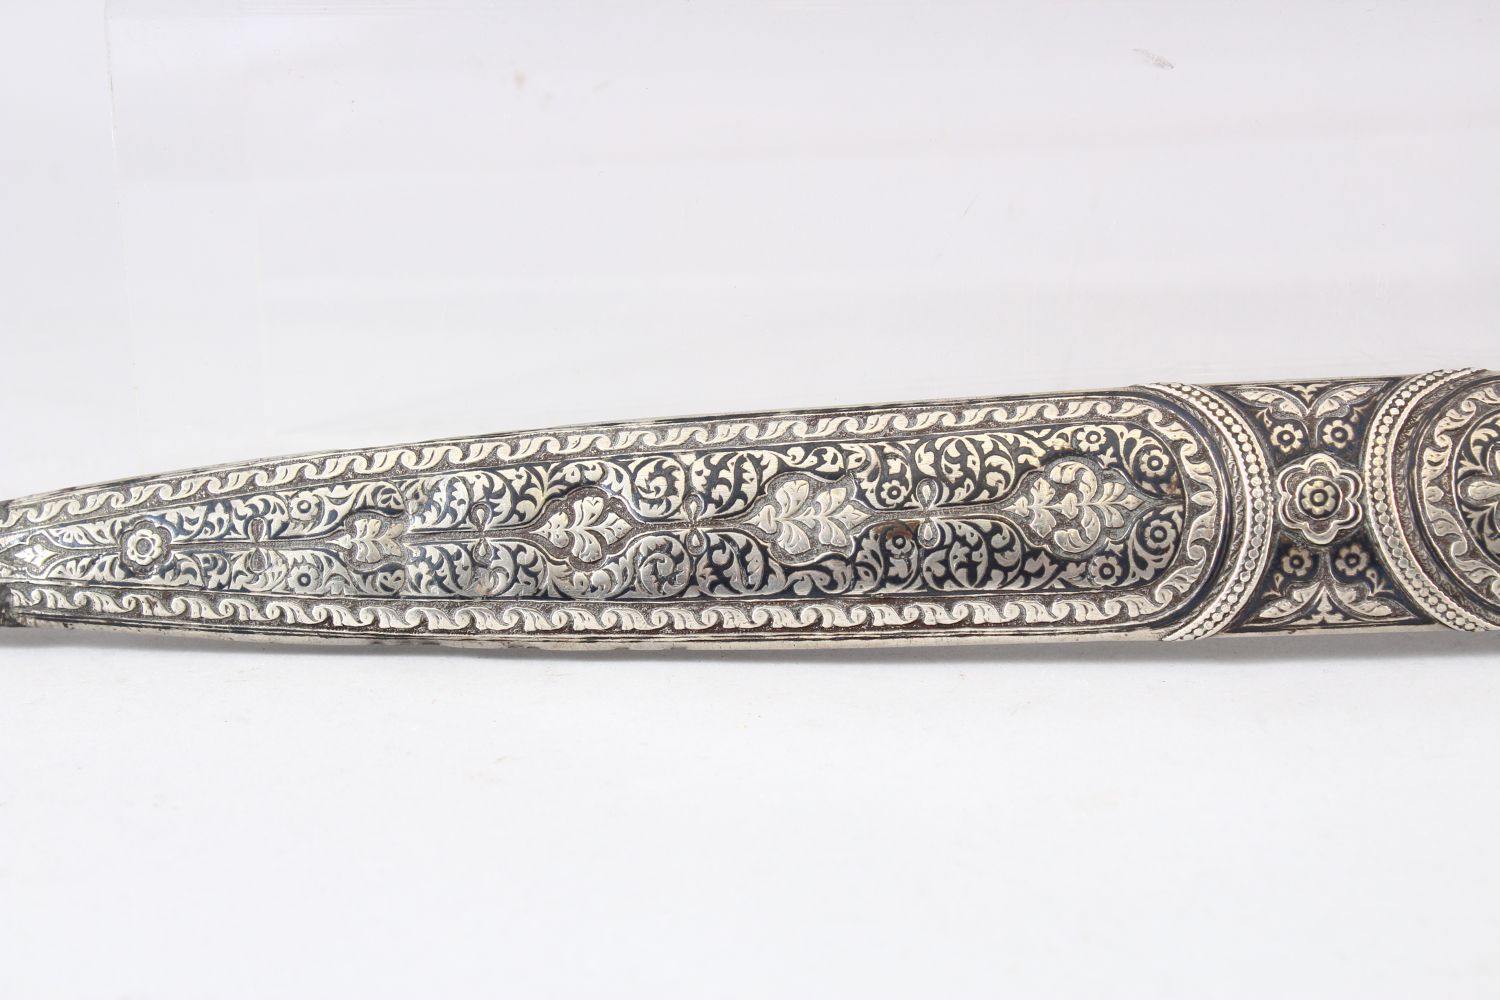 A 19TH CENTURY KINDJAL DAGGER and scabbard, 47.5cm long. - Image 3 of 8